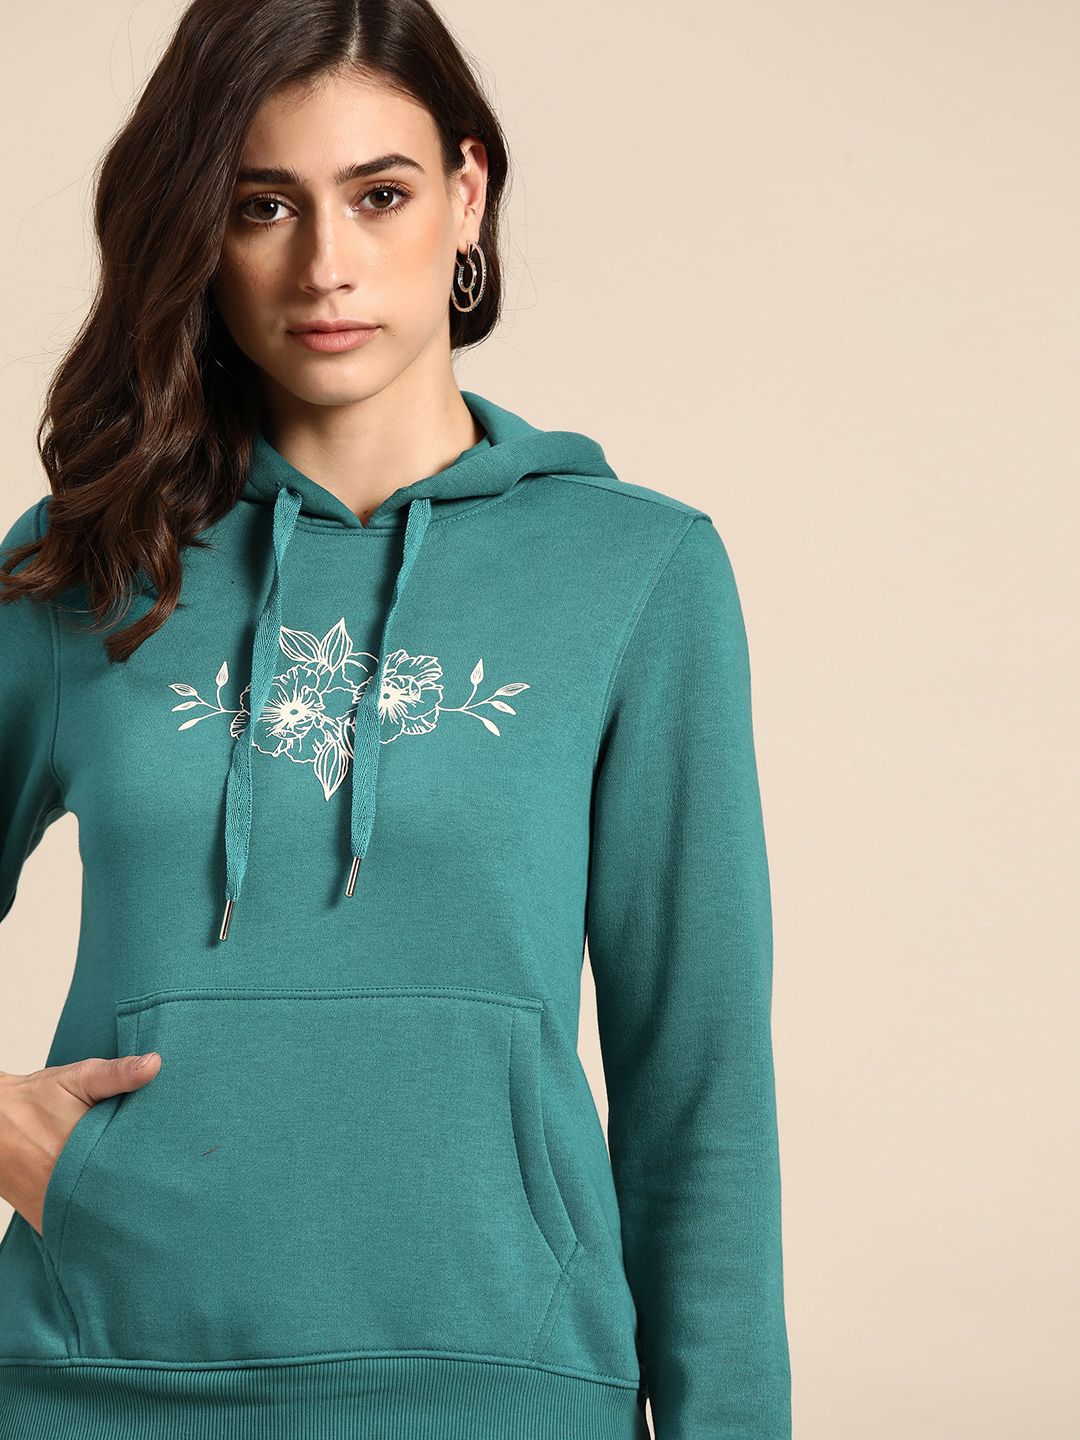 all about you Women Teal Blue Printed Hooded Sweatshirt Price in India